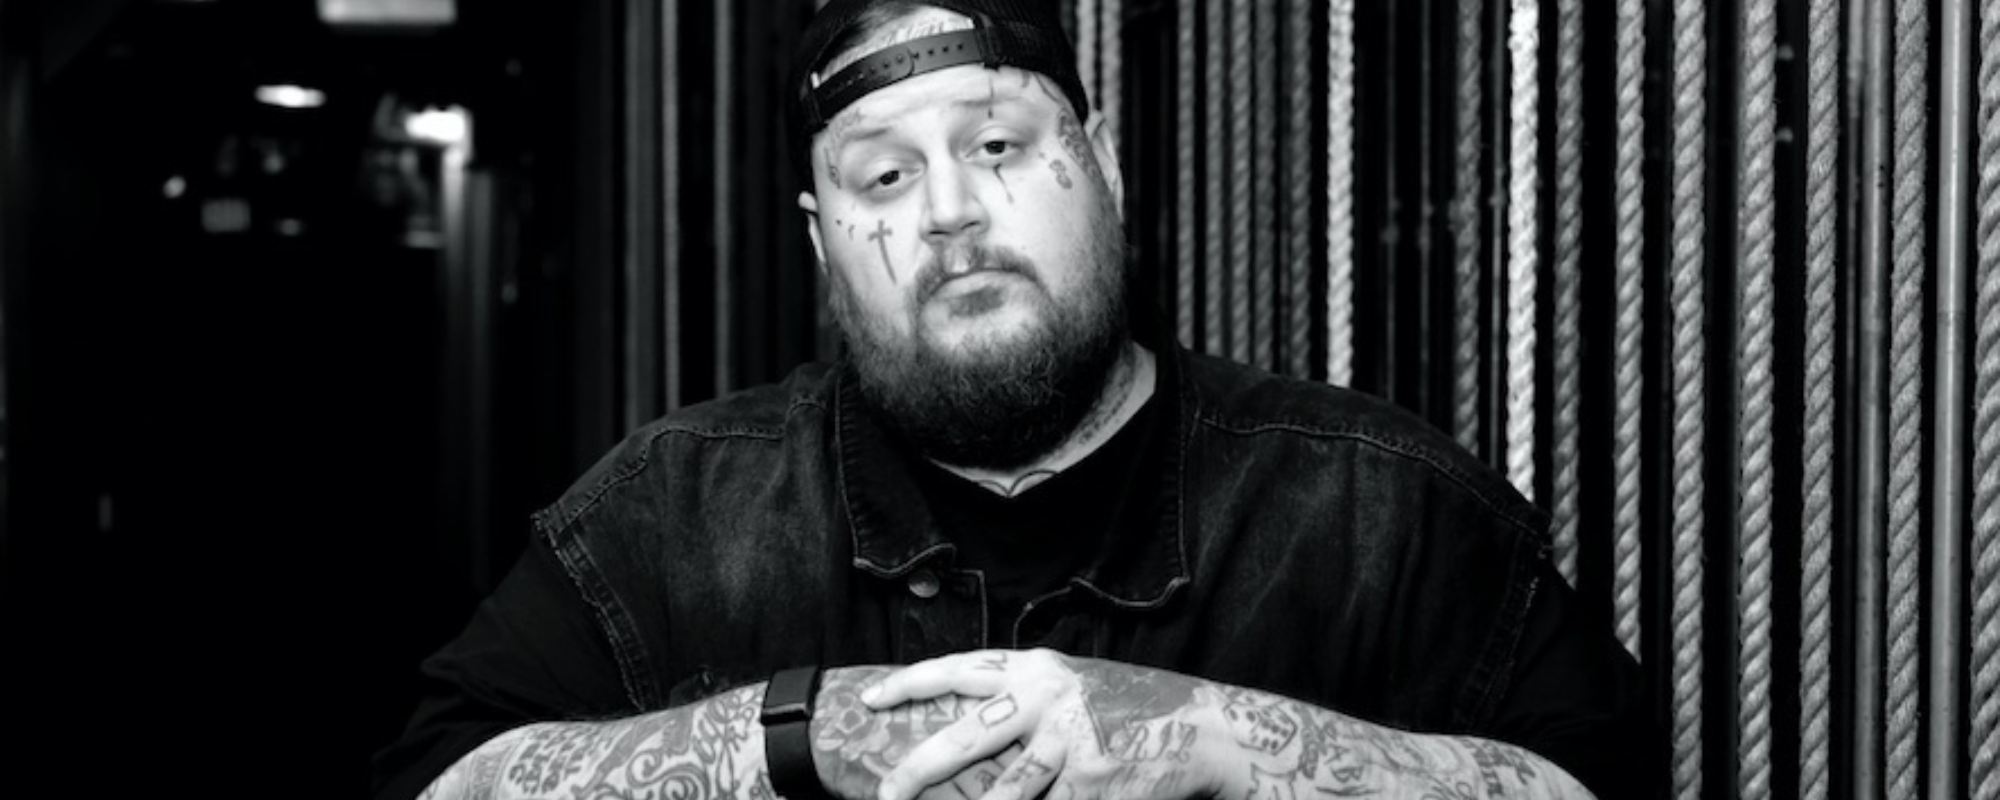 Jelly Roll Reveals the Major Change He Made Before Finding Success